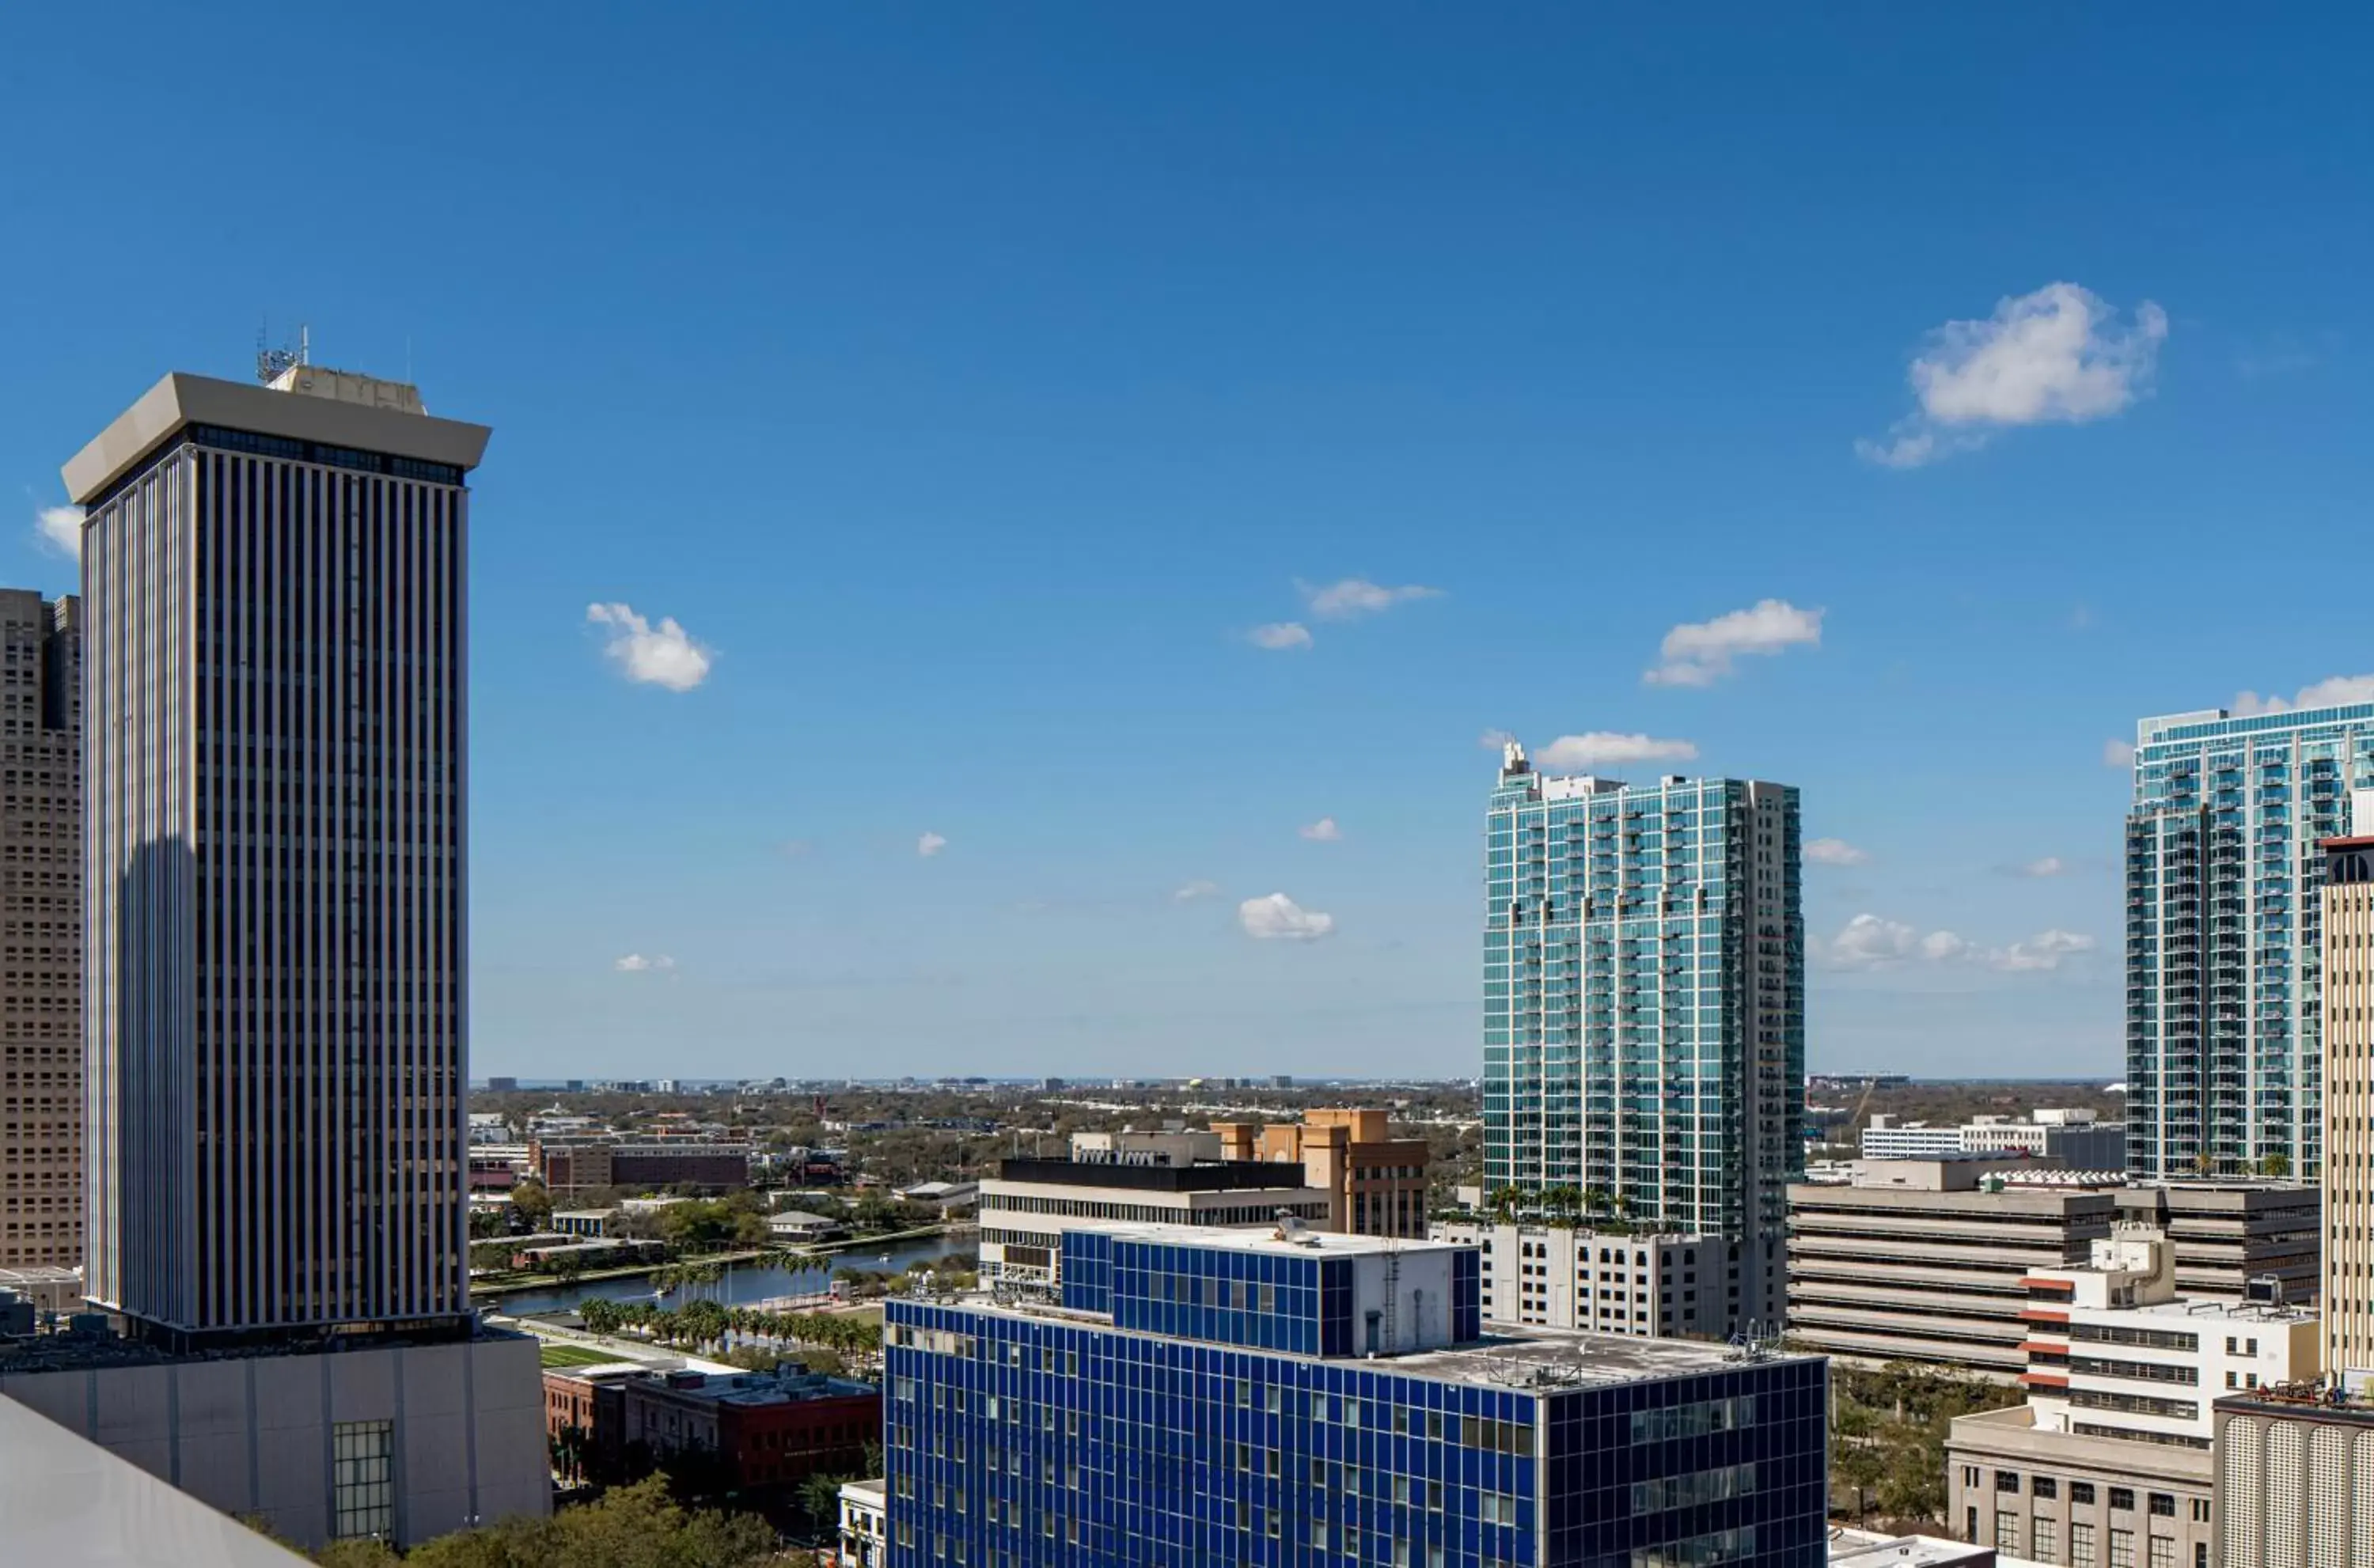 City view in Hyatt Place Tampa Downtown